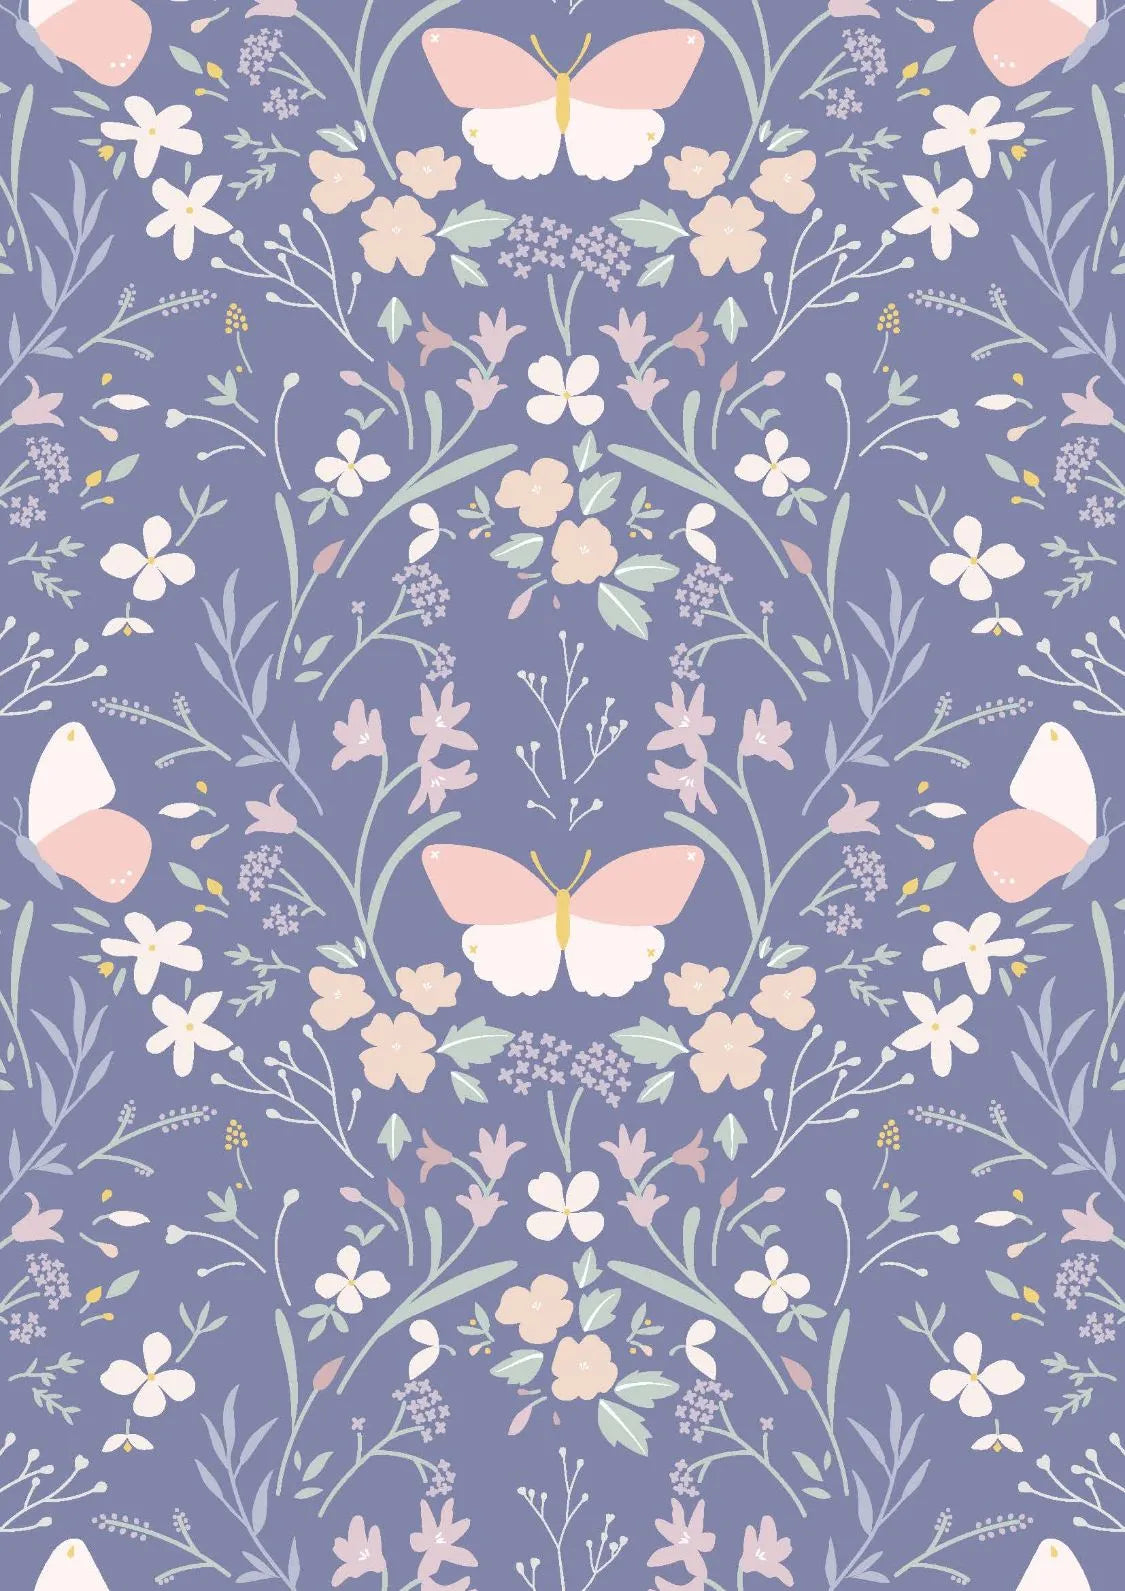 Florals and pink butterflies on a purple cotton fabric - Heart of Summer by Lewis and Irene